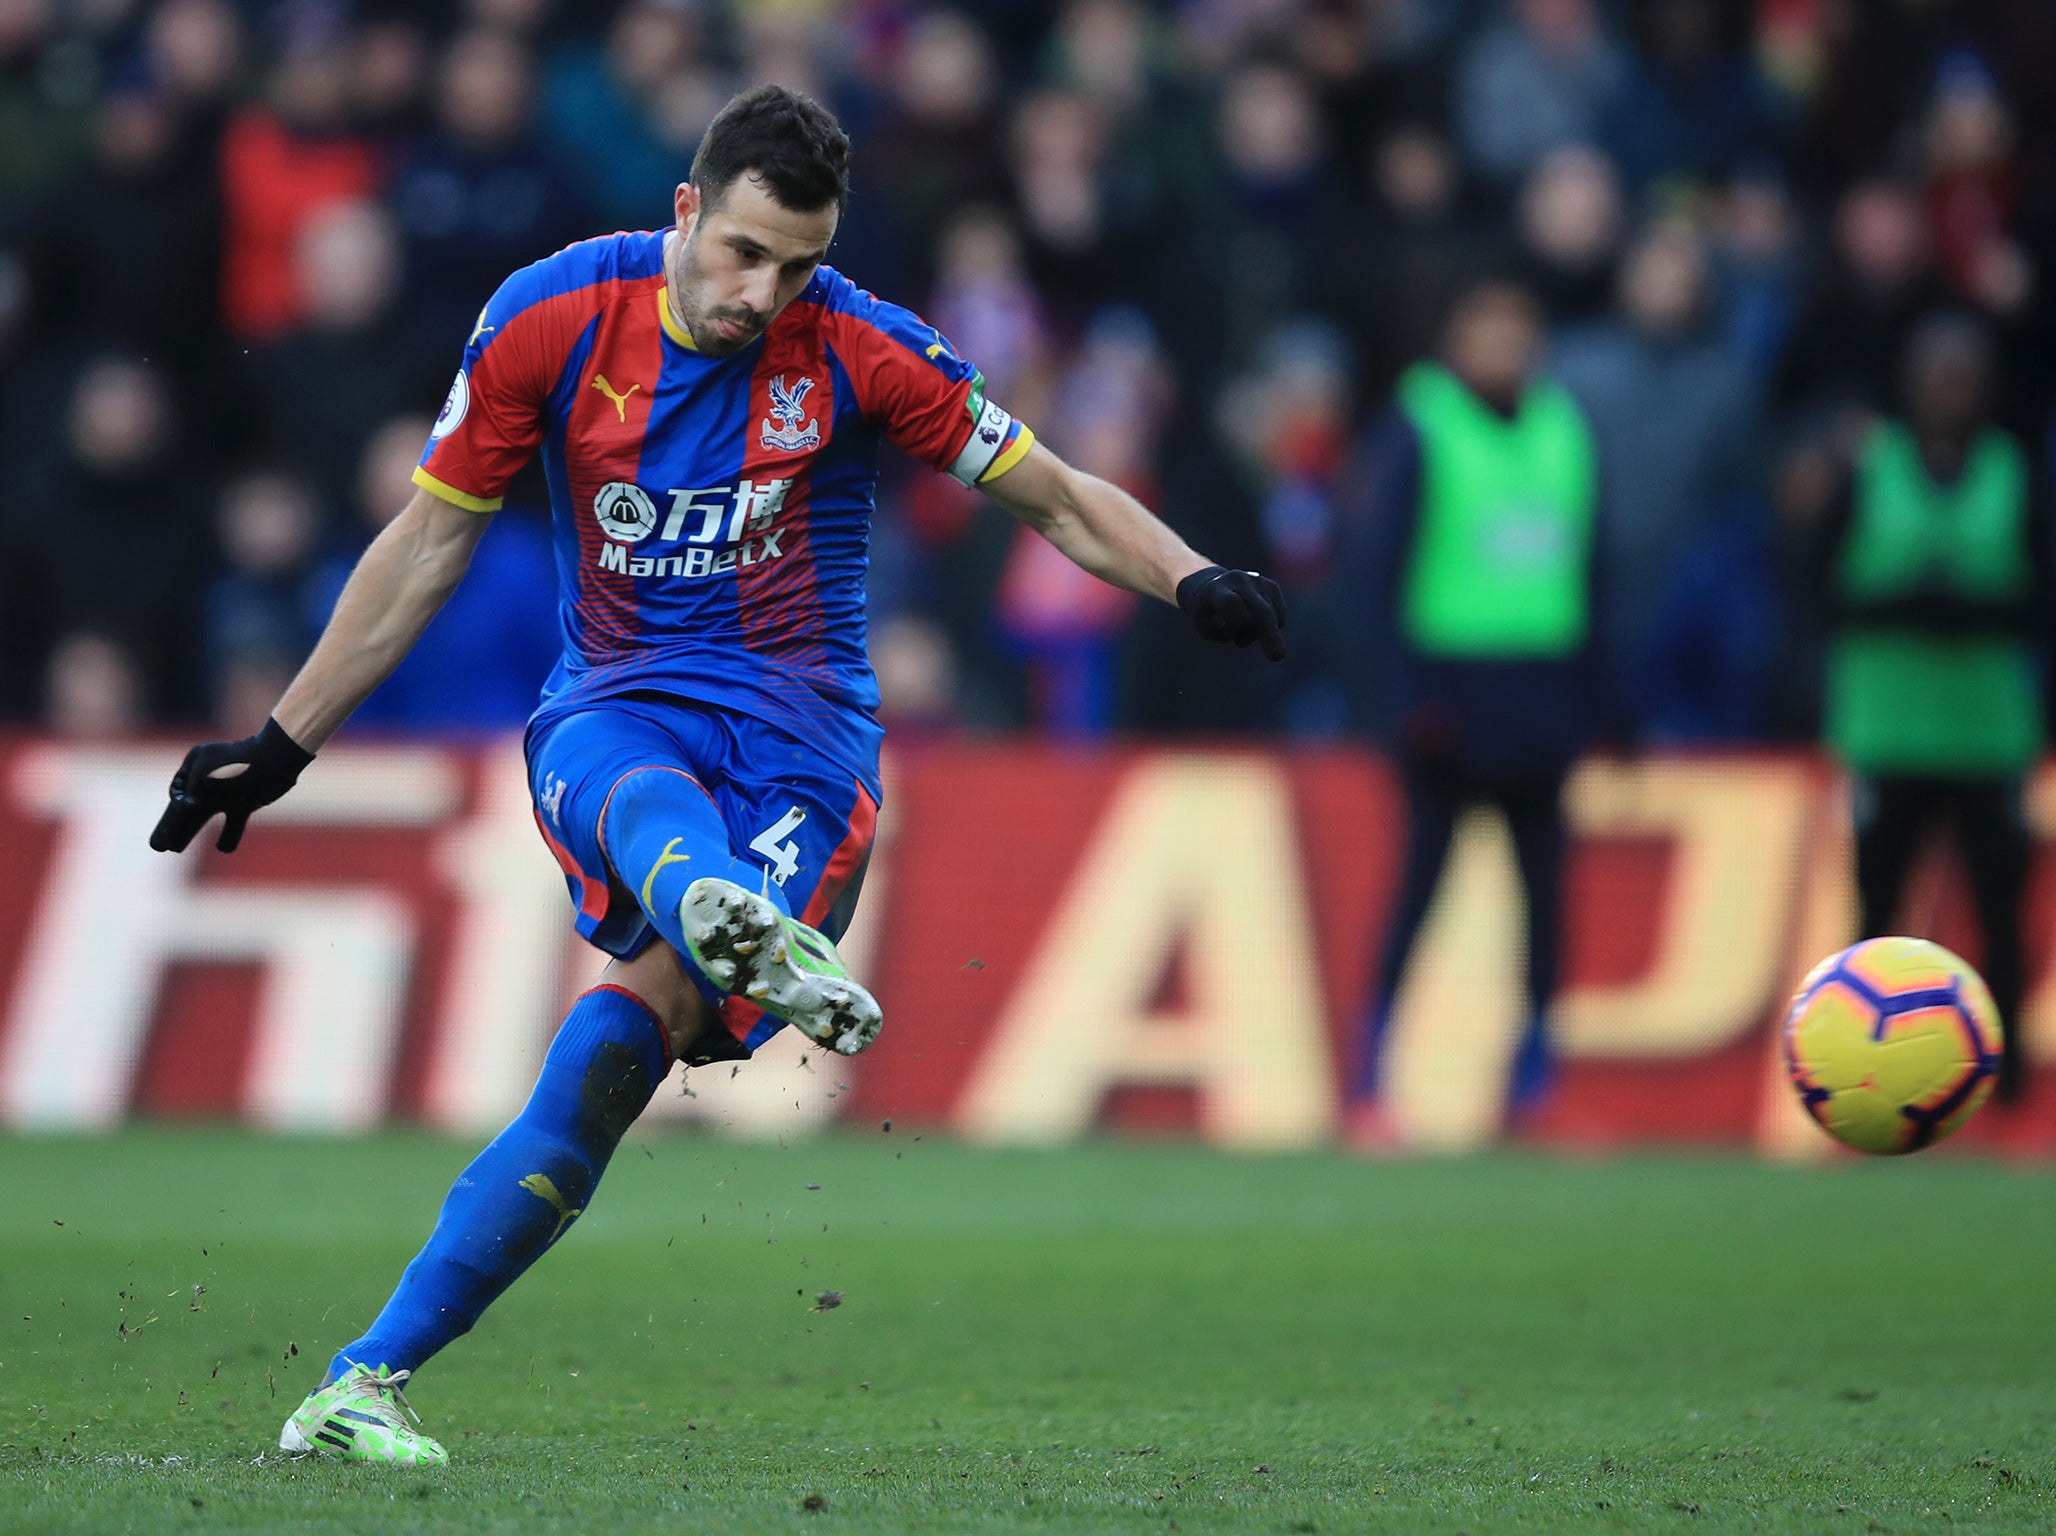 Luka Milivojevic opened the scoring from the spot